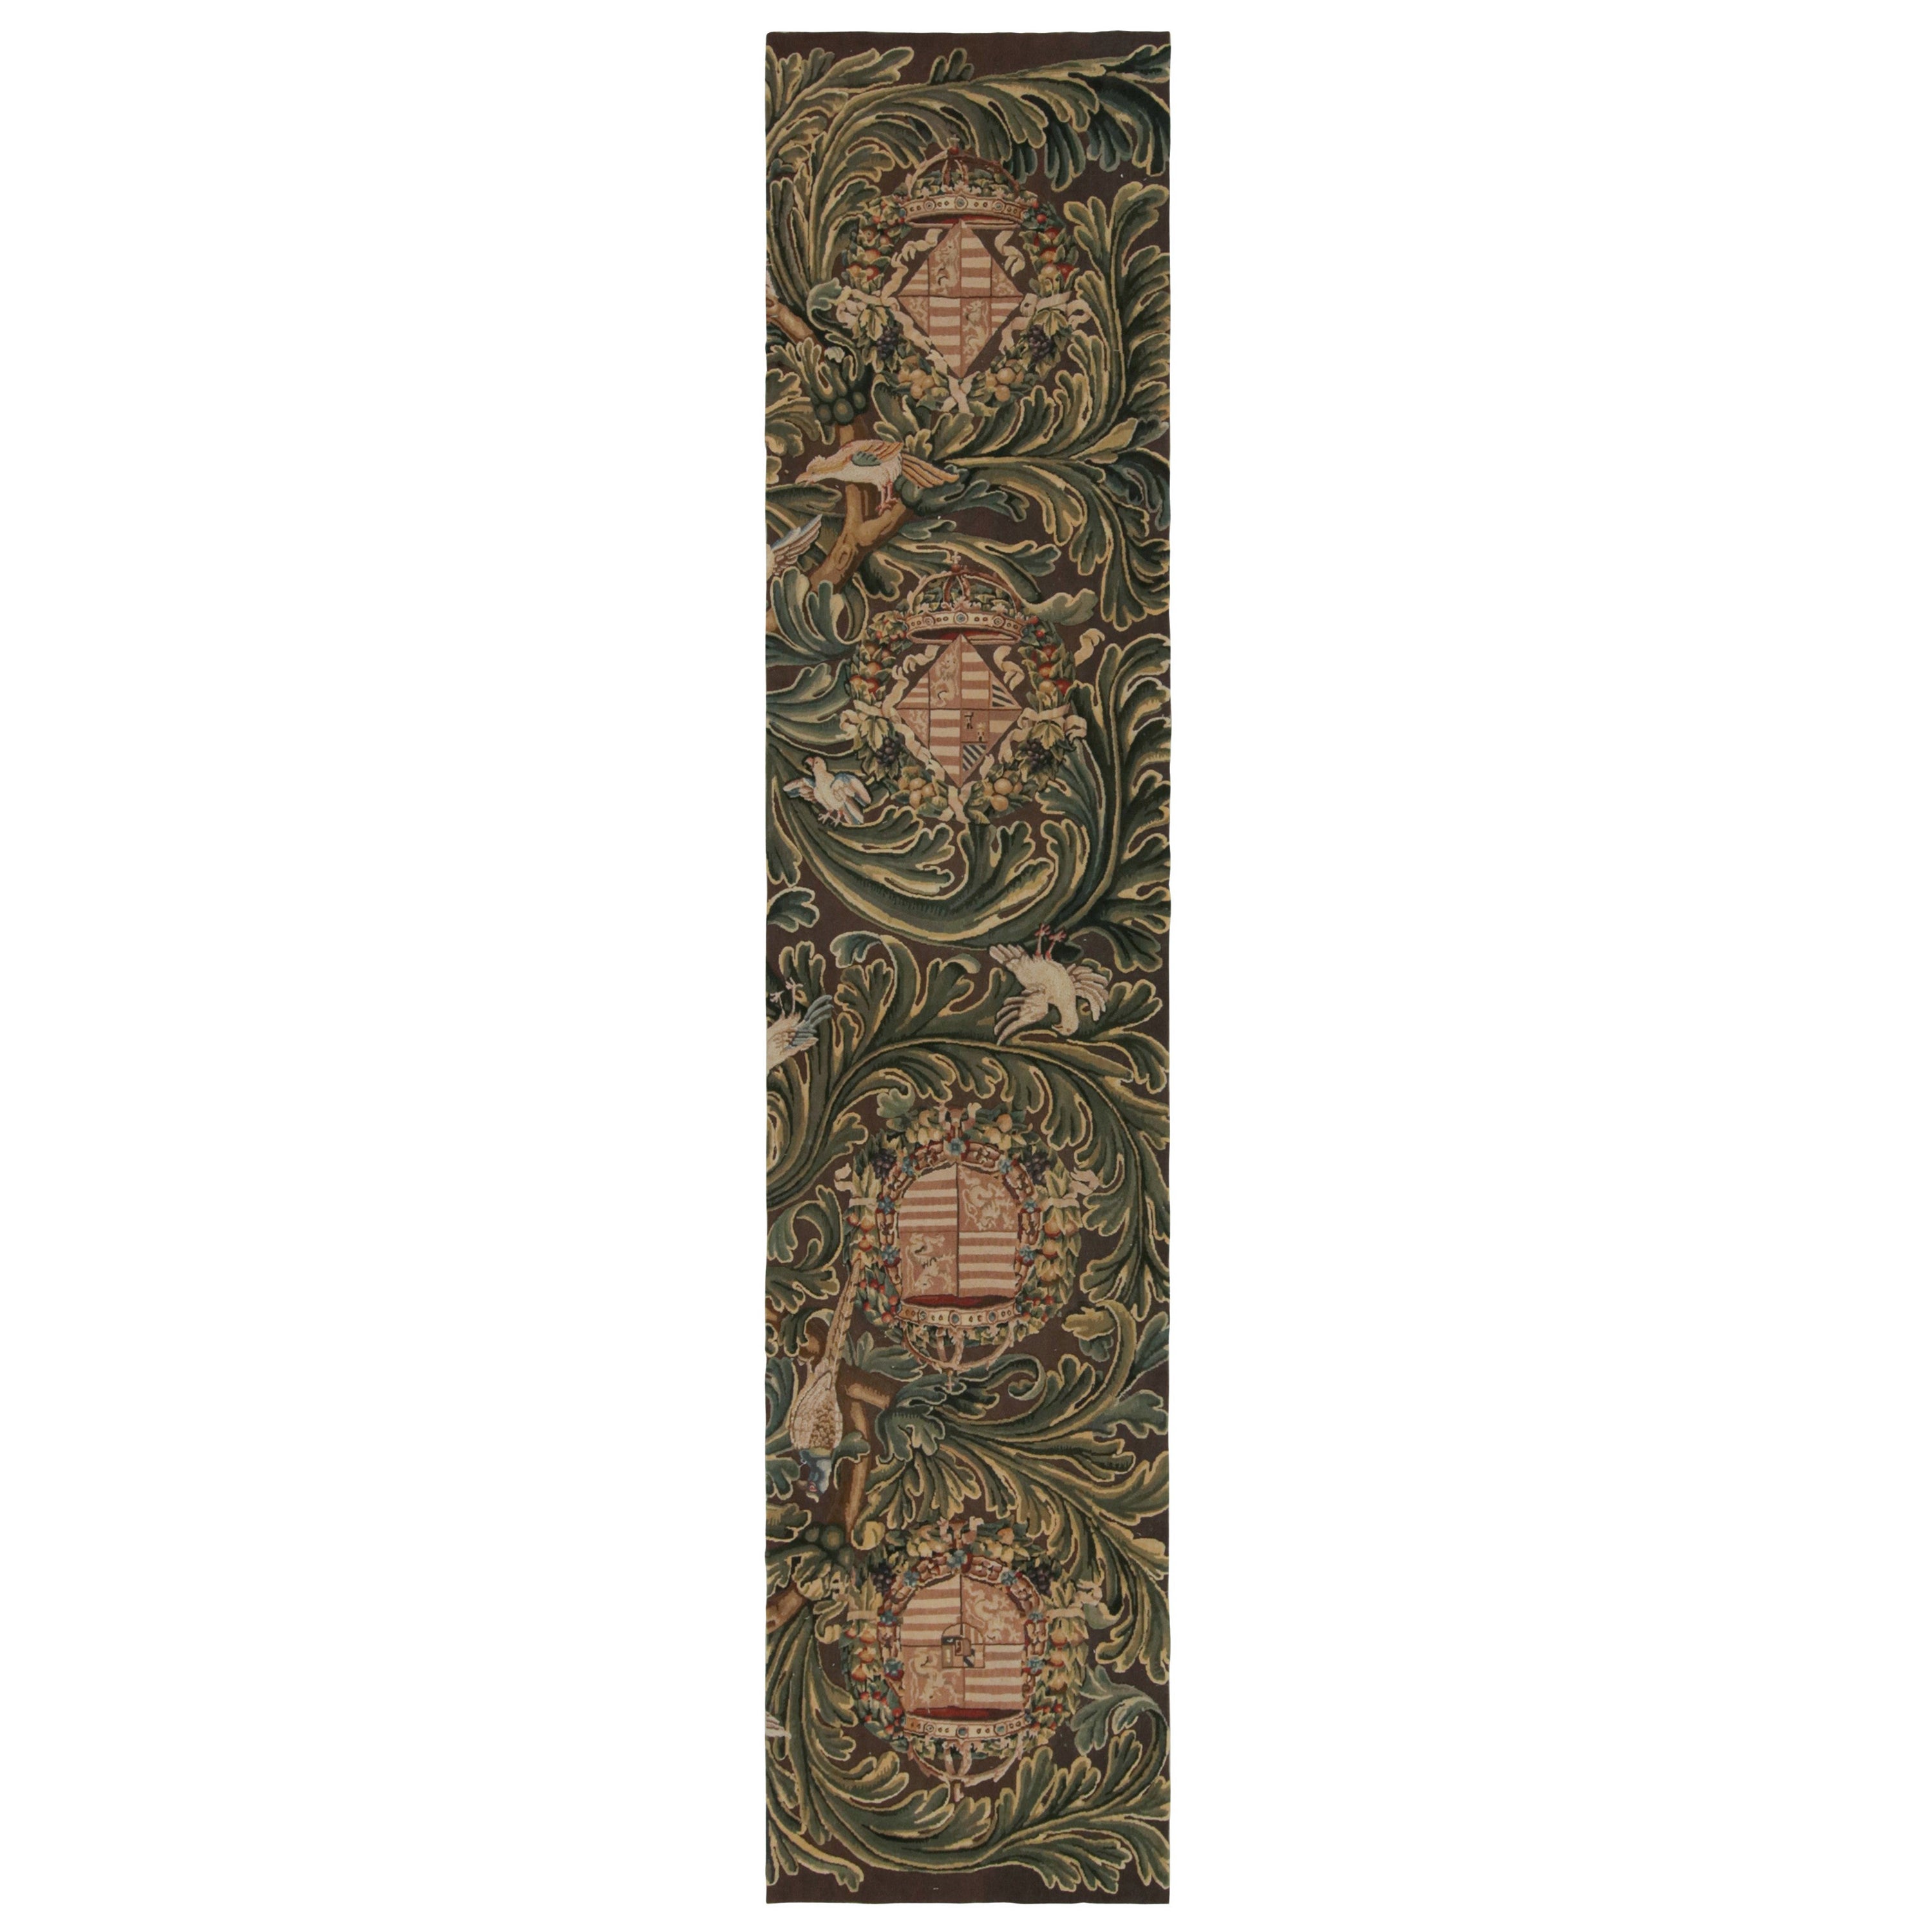 Rug & Kilim’s Tudor Style Flatweave Runner, with Crests and Floral Patterns